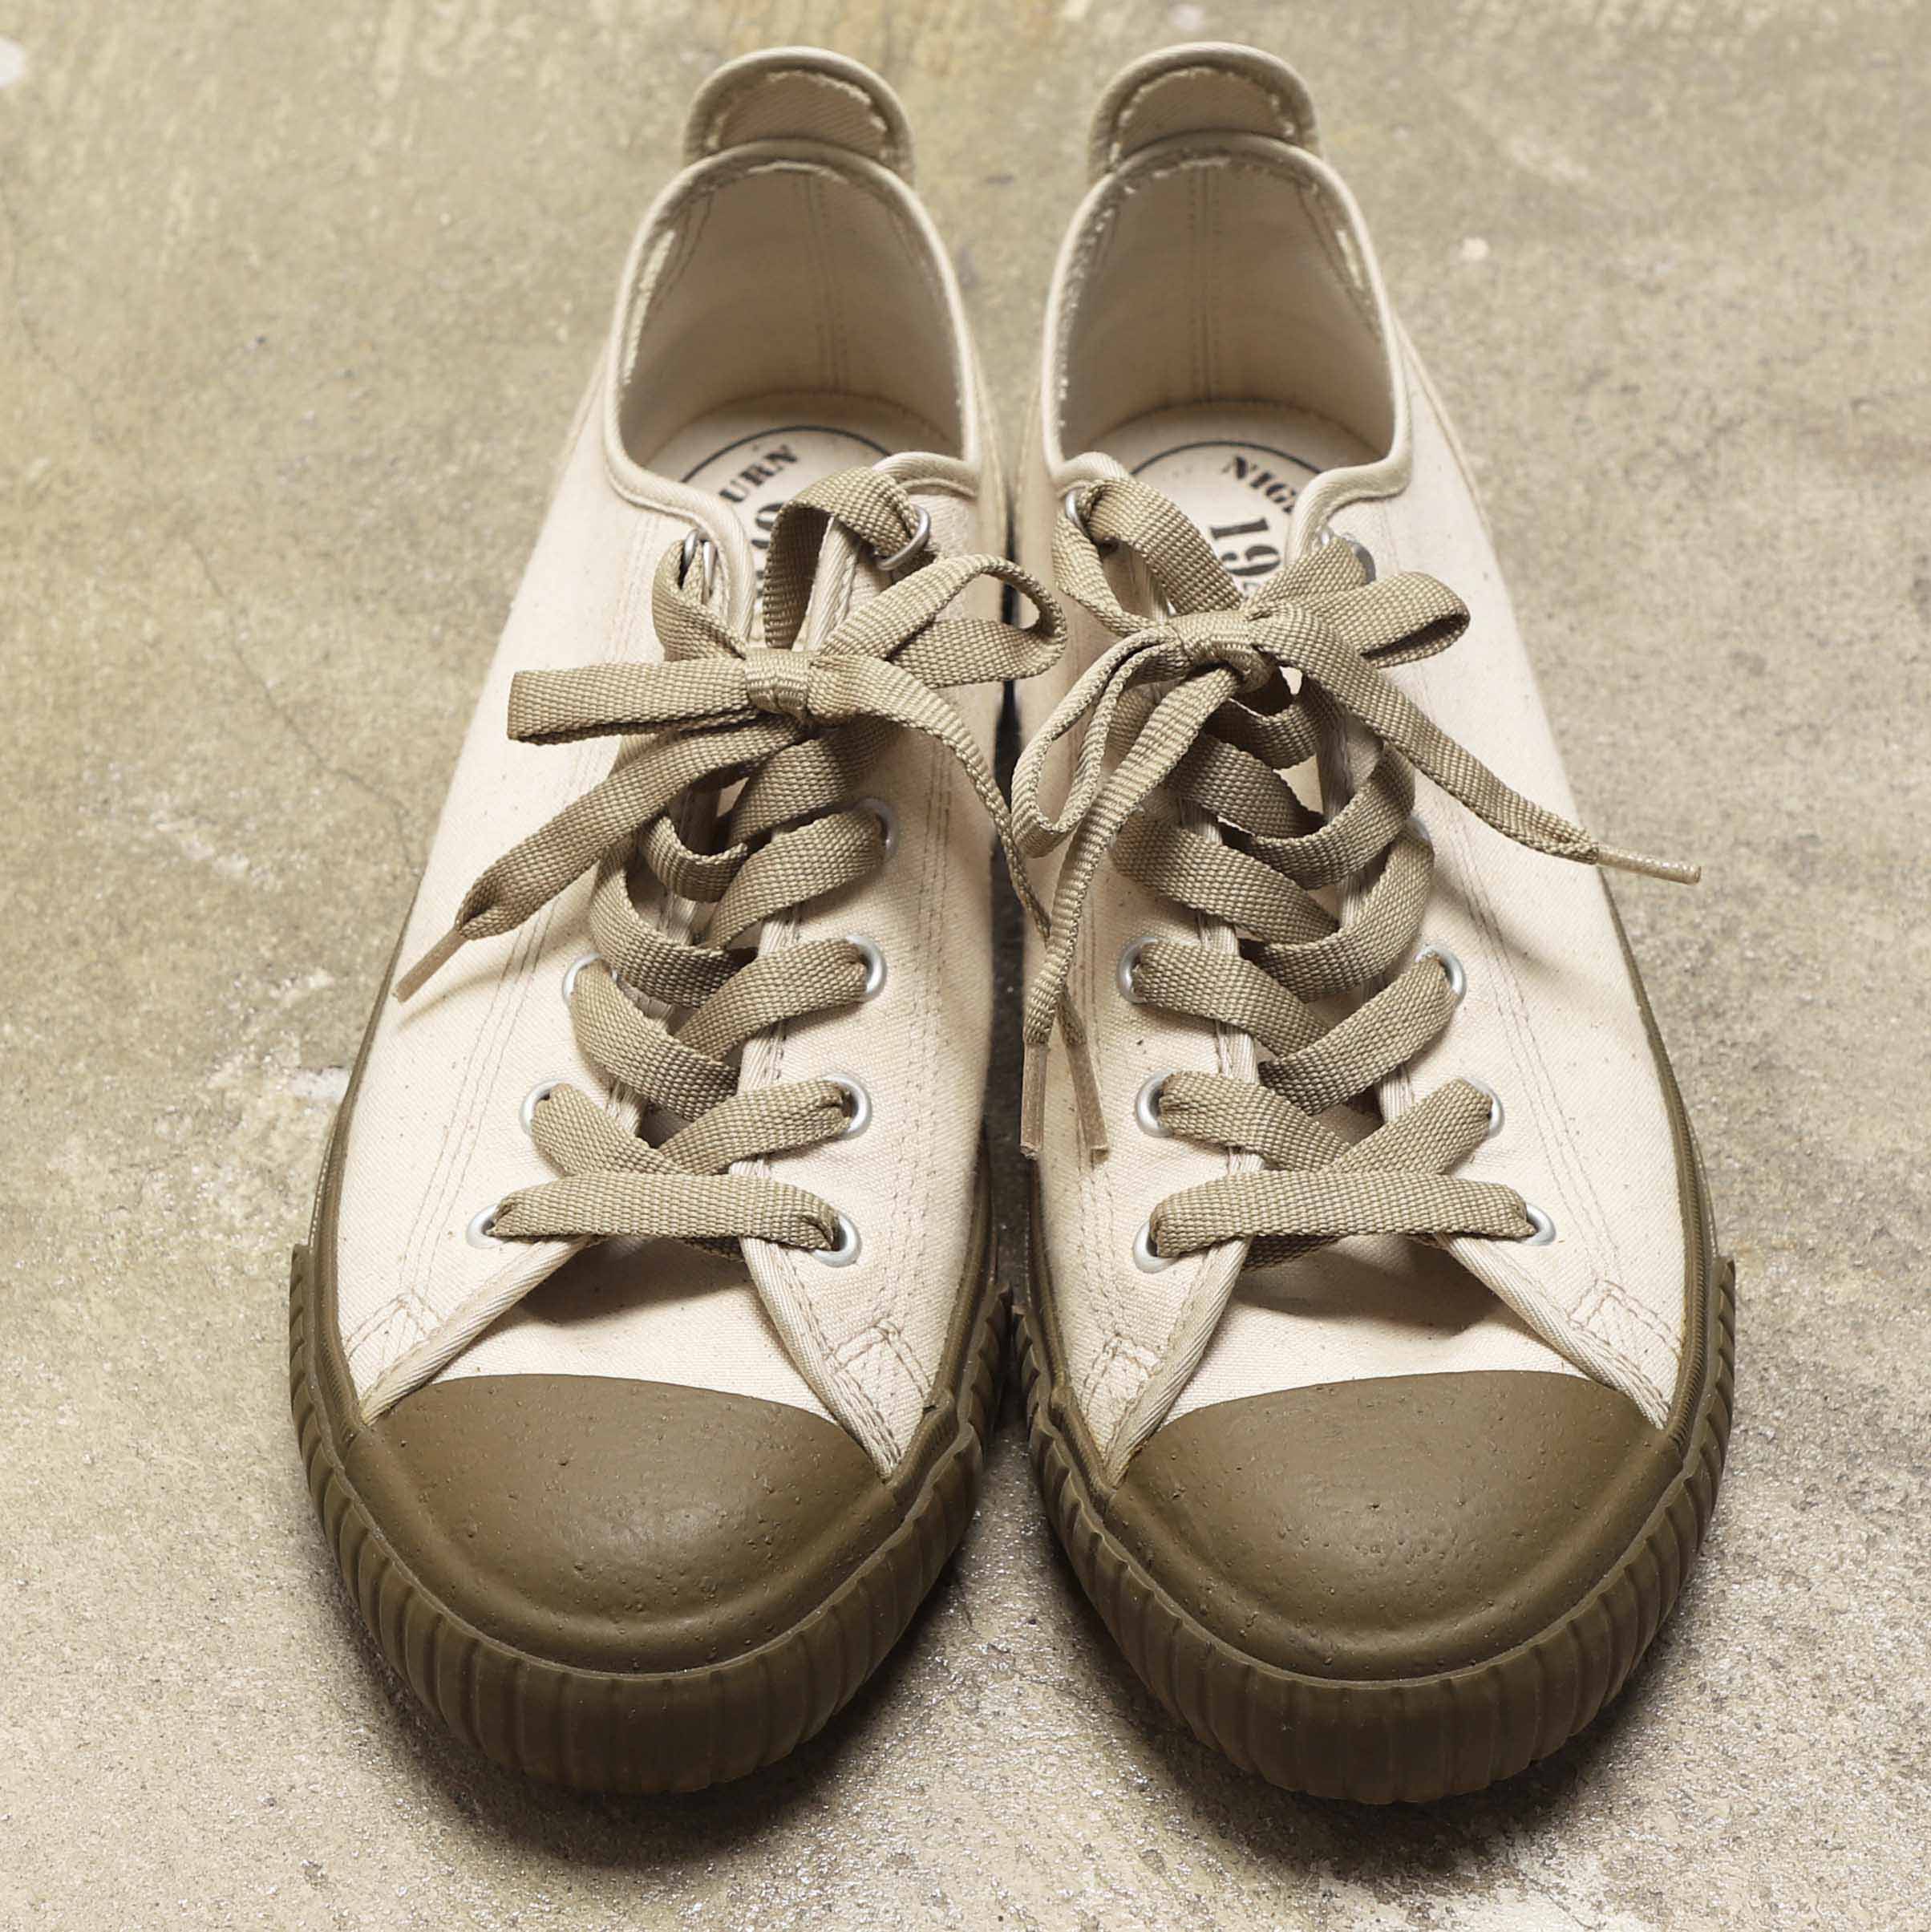 NIGEL CABOURN ARMY TRAINERS - OFF WHITE